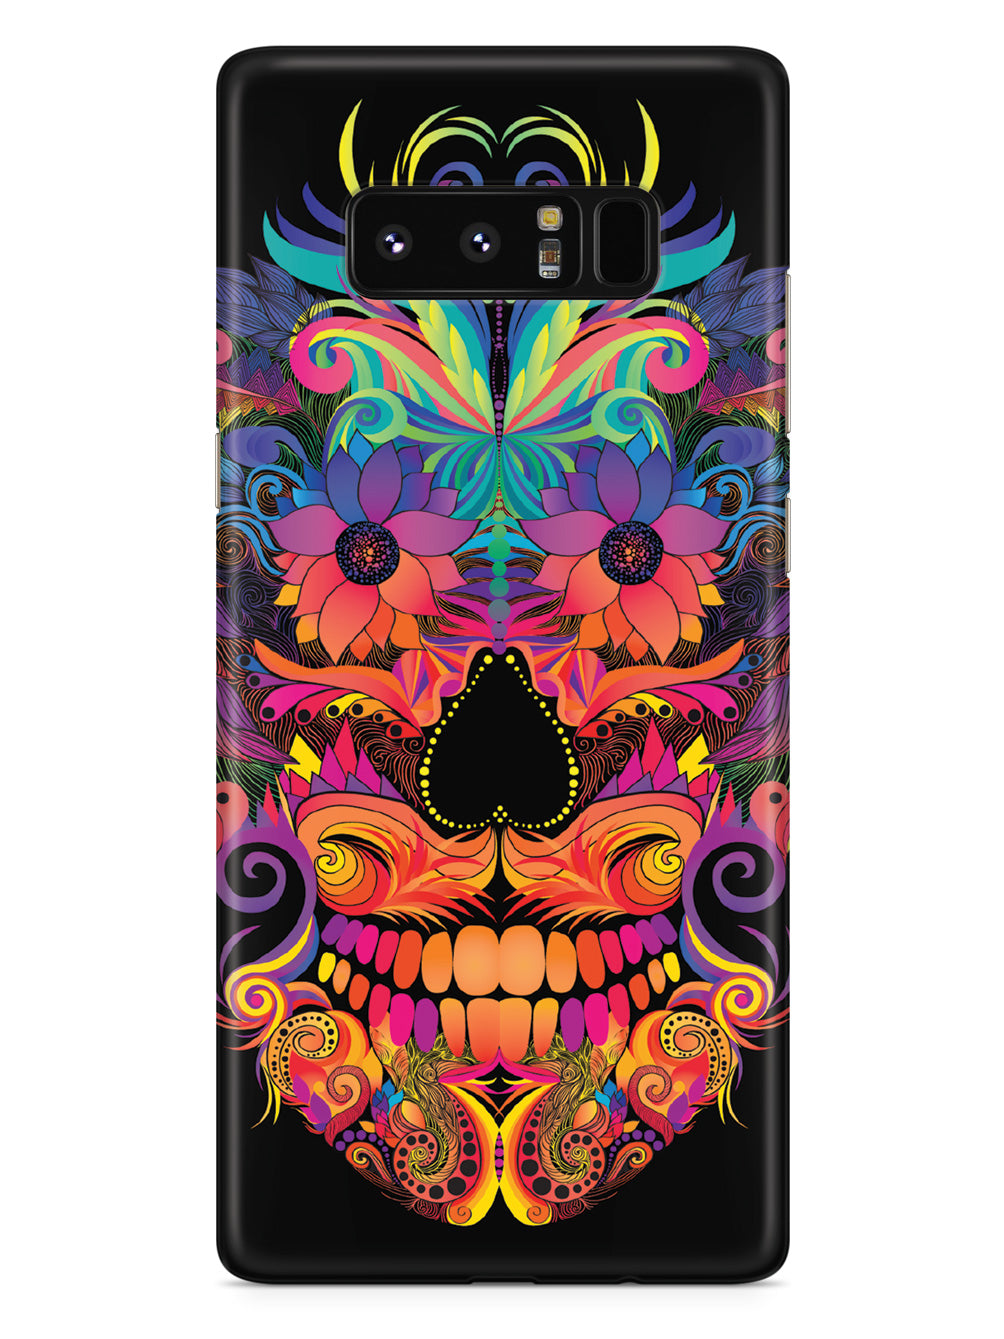 Mexican Skull Day of the Dead Inspired Case